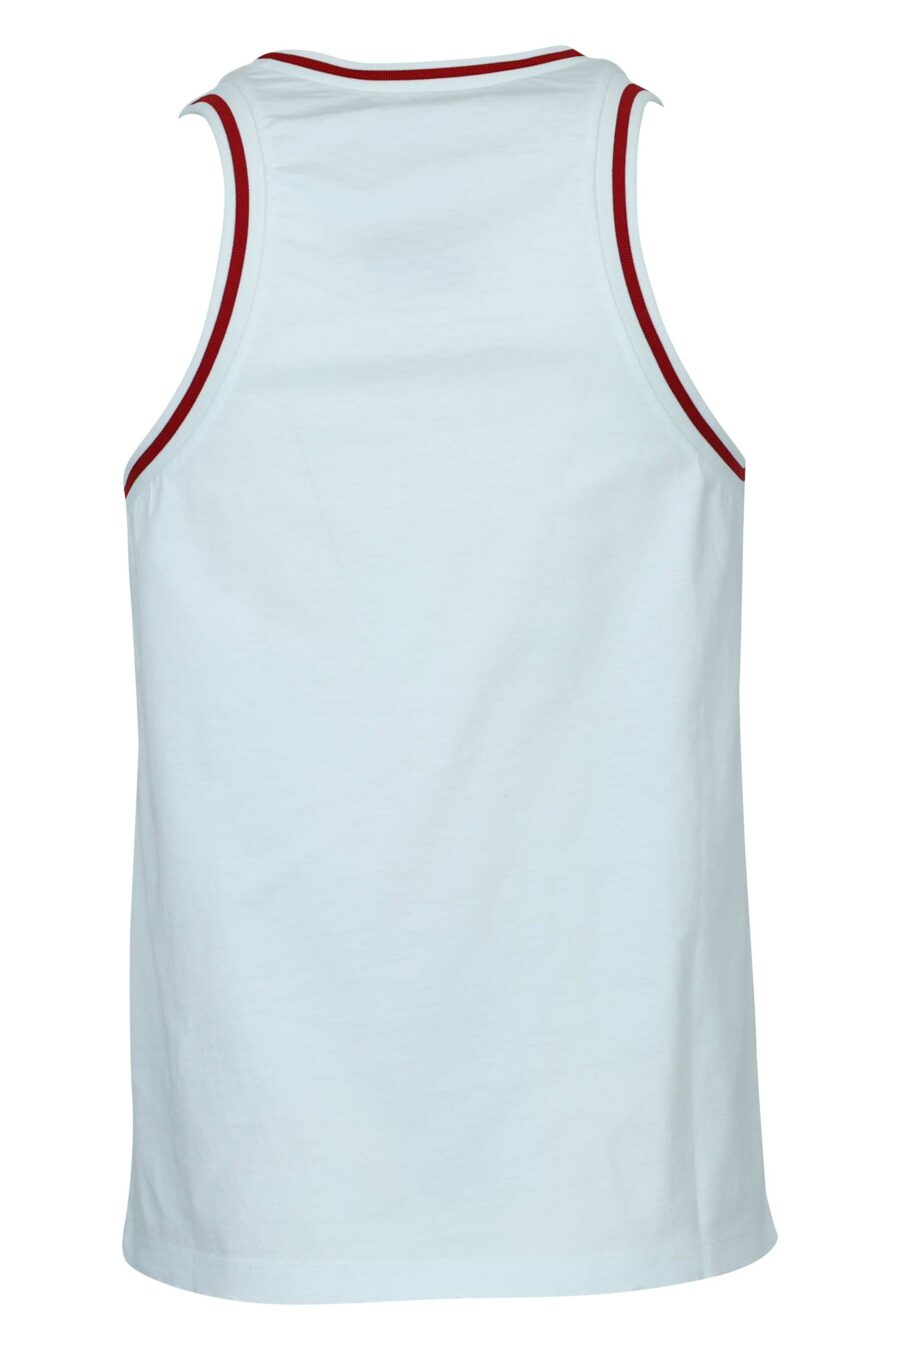 White sleeveless T-shirt with mini logo and red details - 8054148505332 1